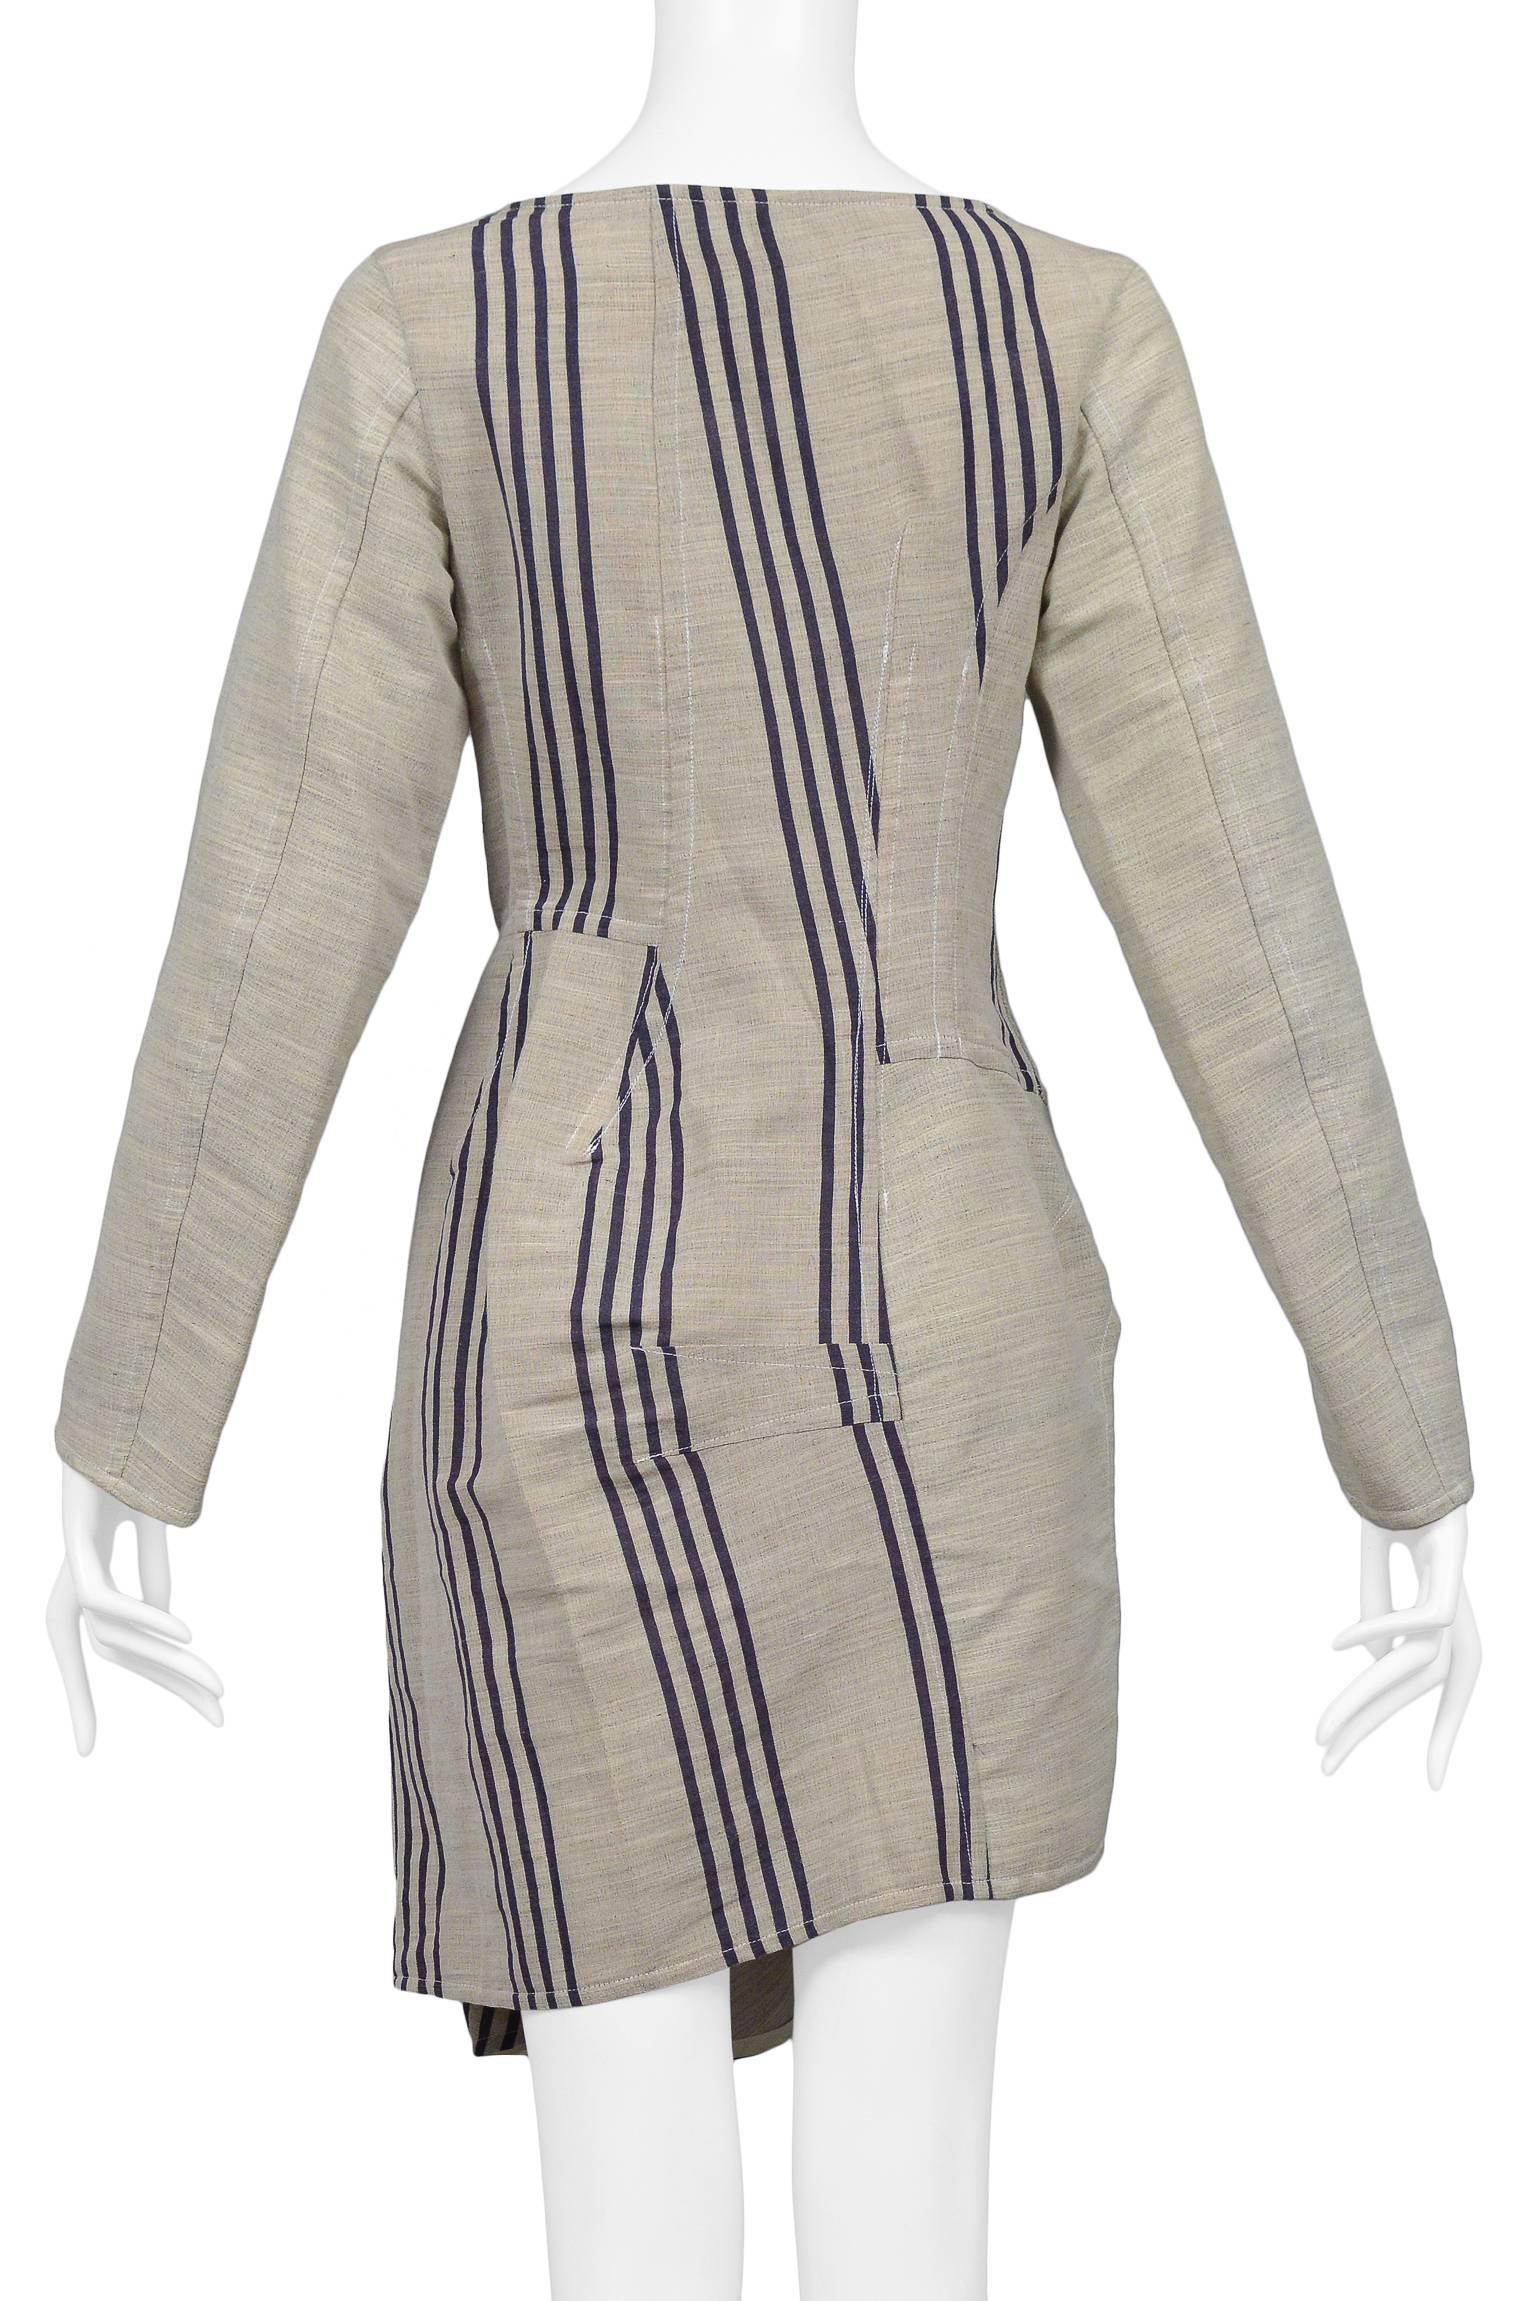 Gray Comme des Garcons Deconstructed Corset Tunic Top With Stripe Panels 1998 For Sale